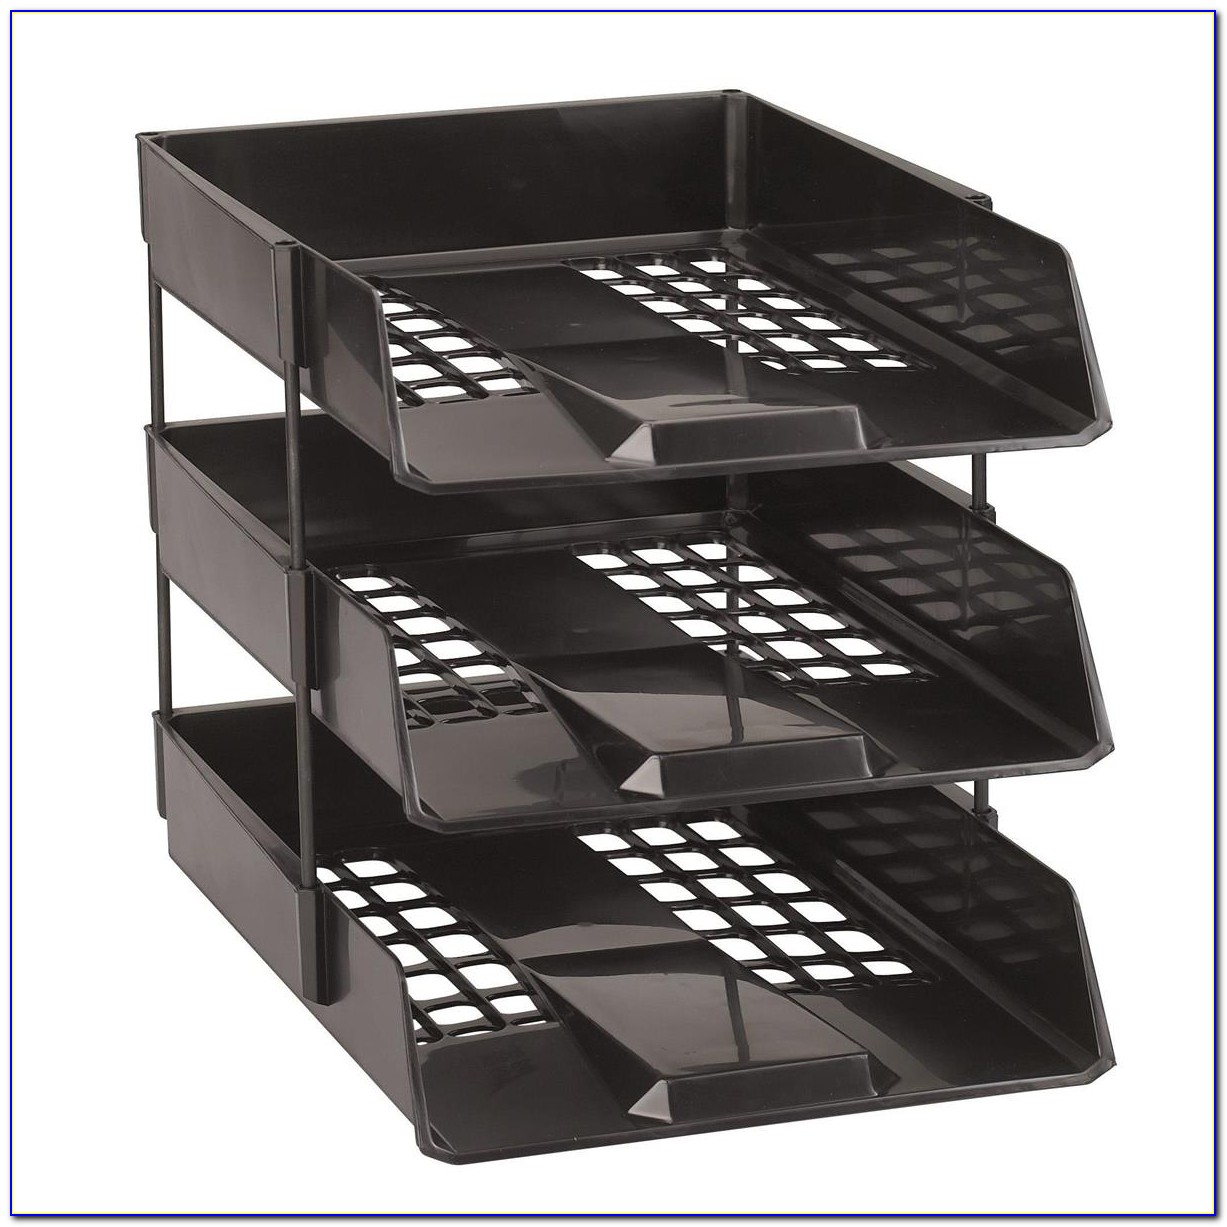 Stackable Letter Trays Walmart